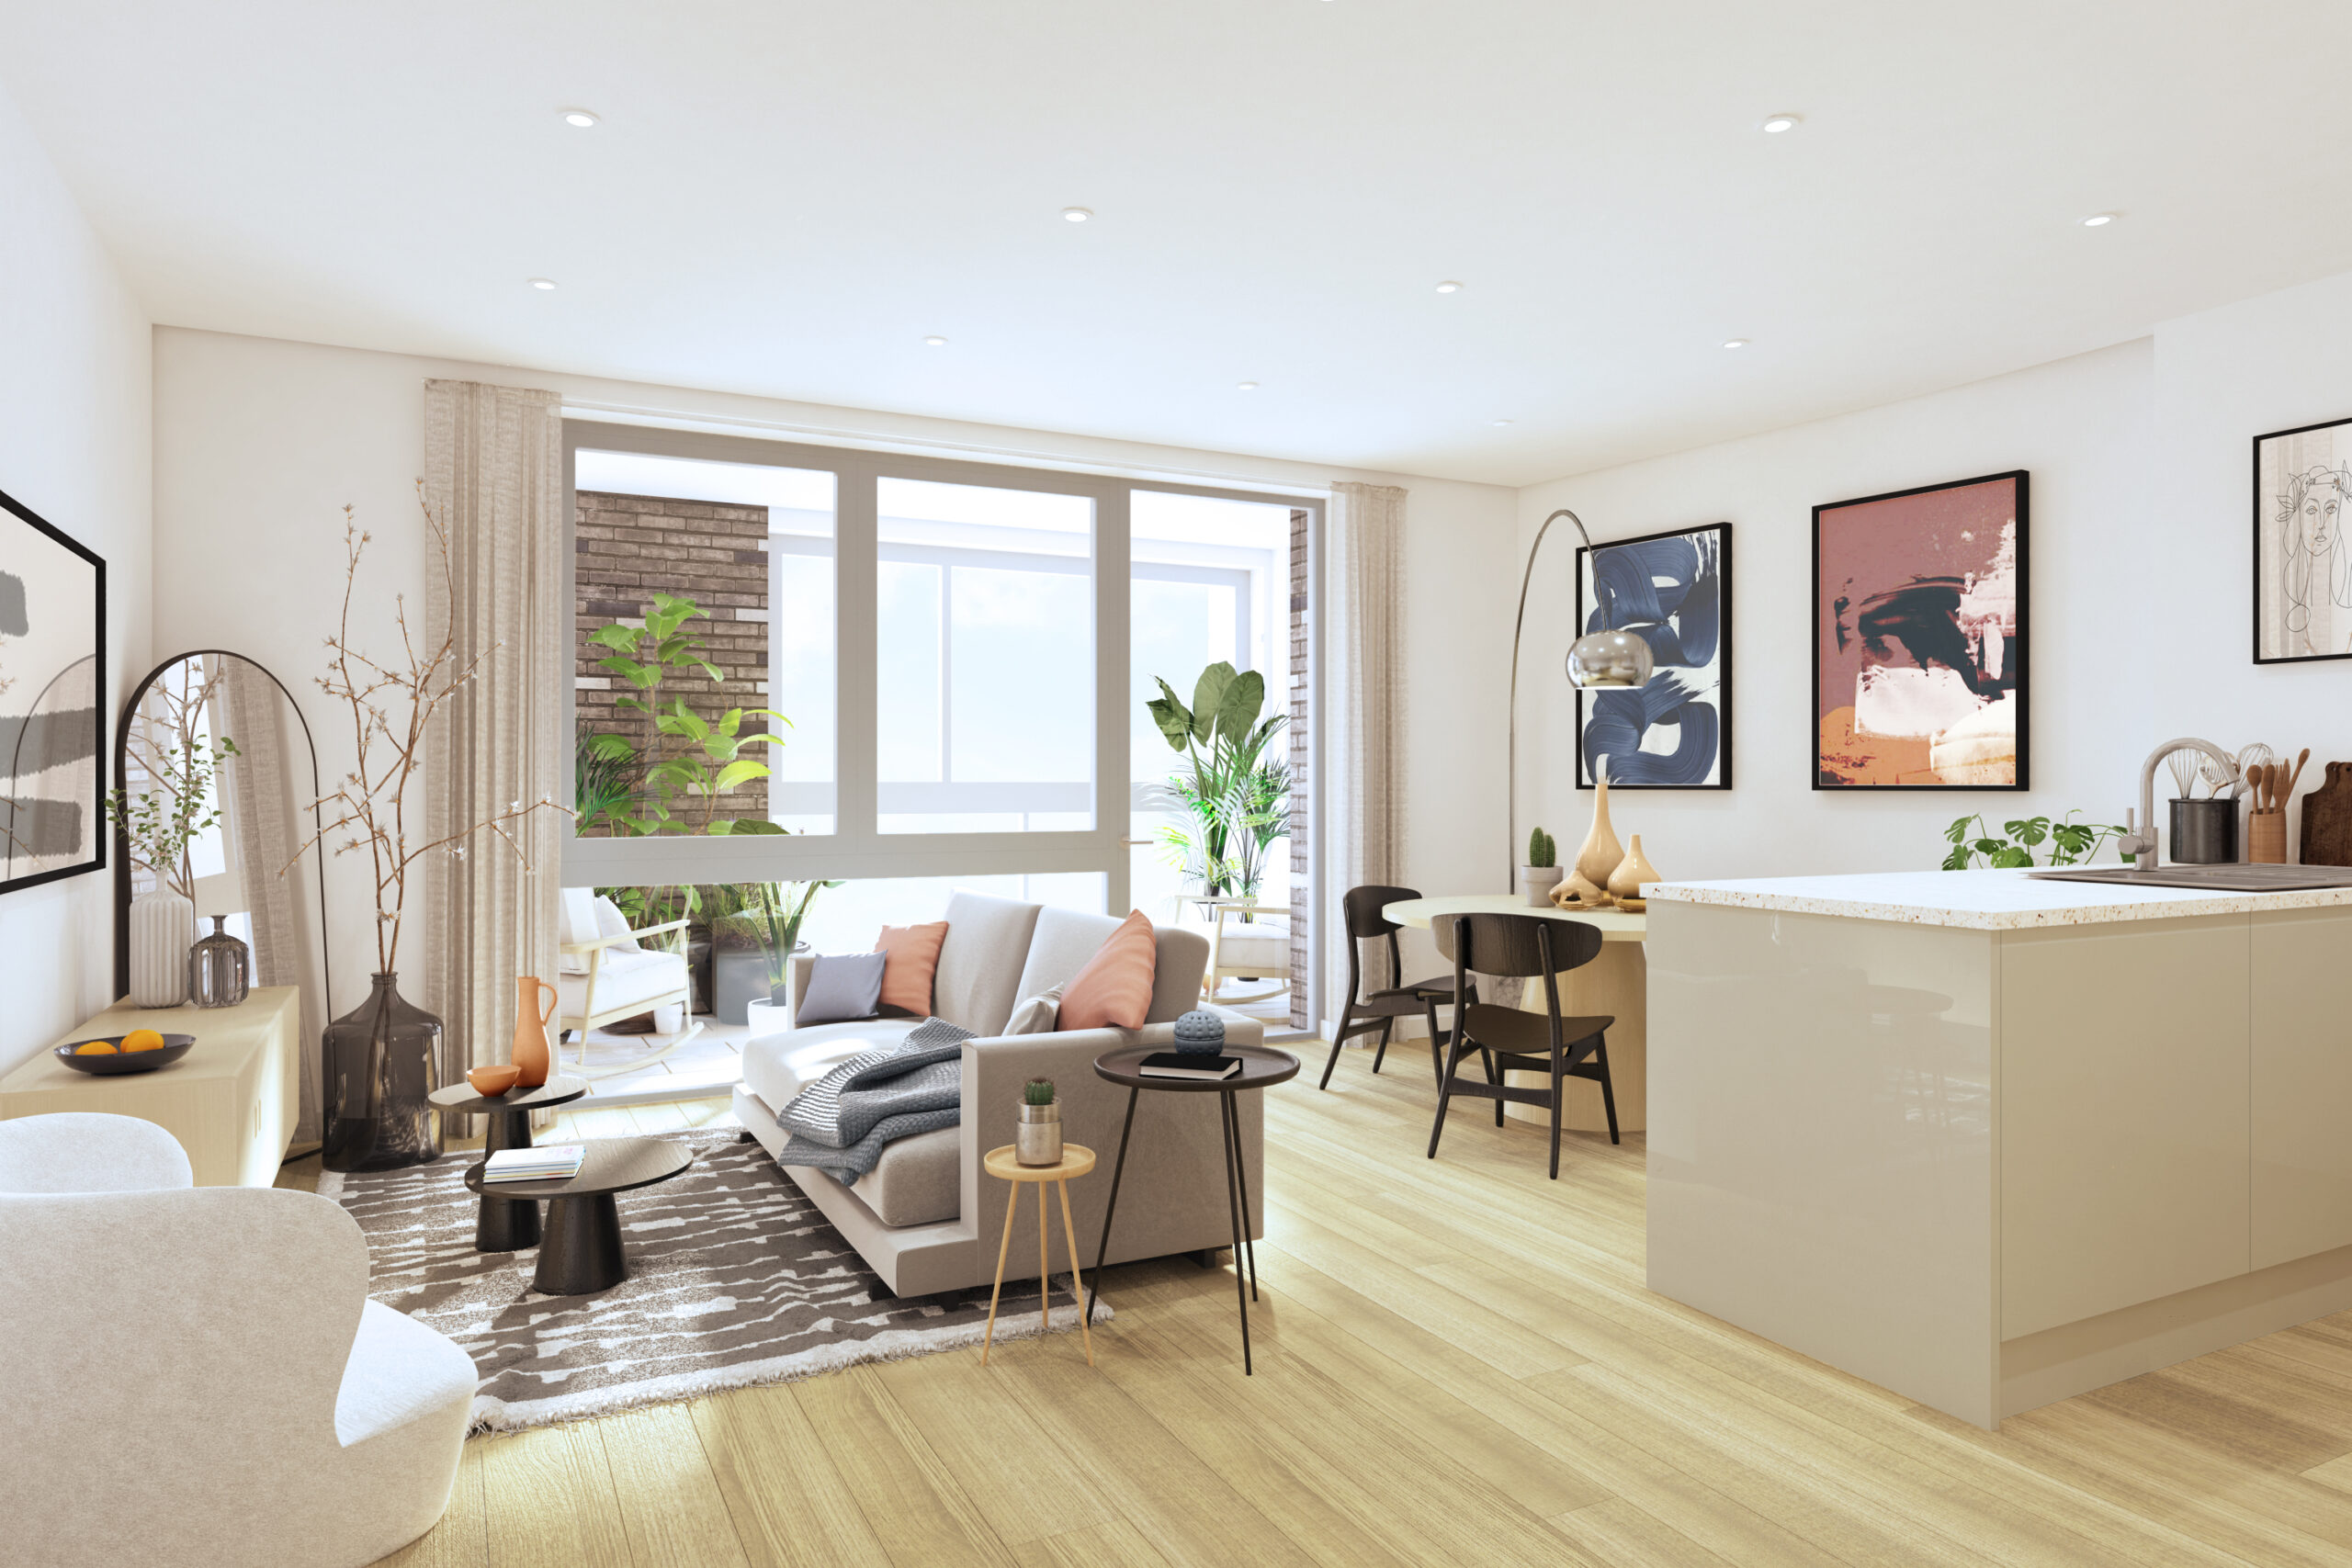 Interior image of Notting Hill Genesis' Aspect Croydon development - available through Shared Ownership on Share to Buy!